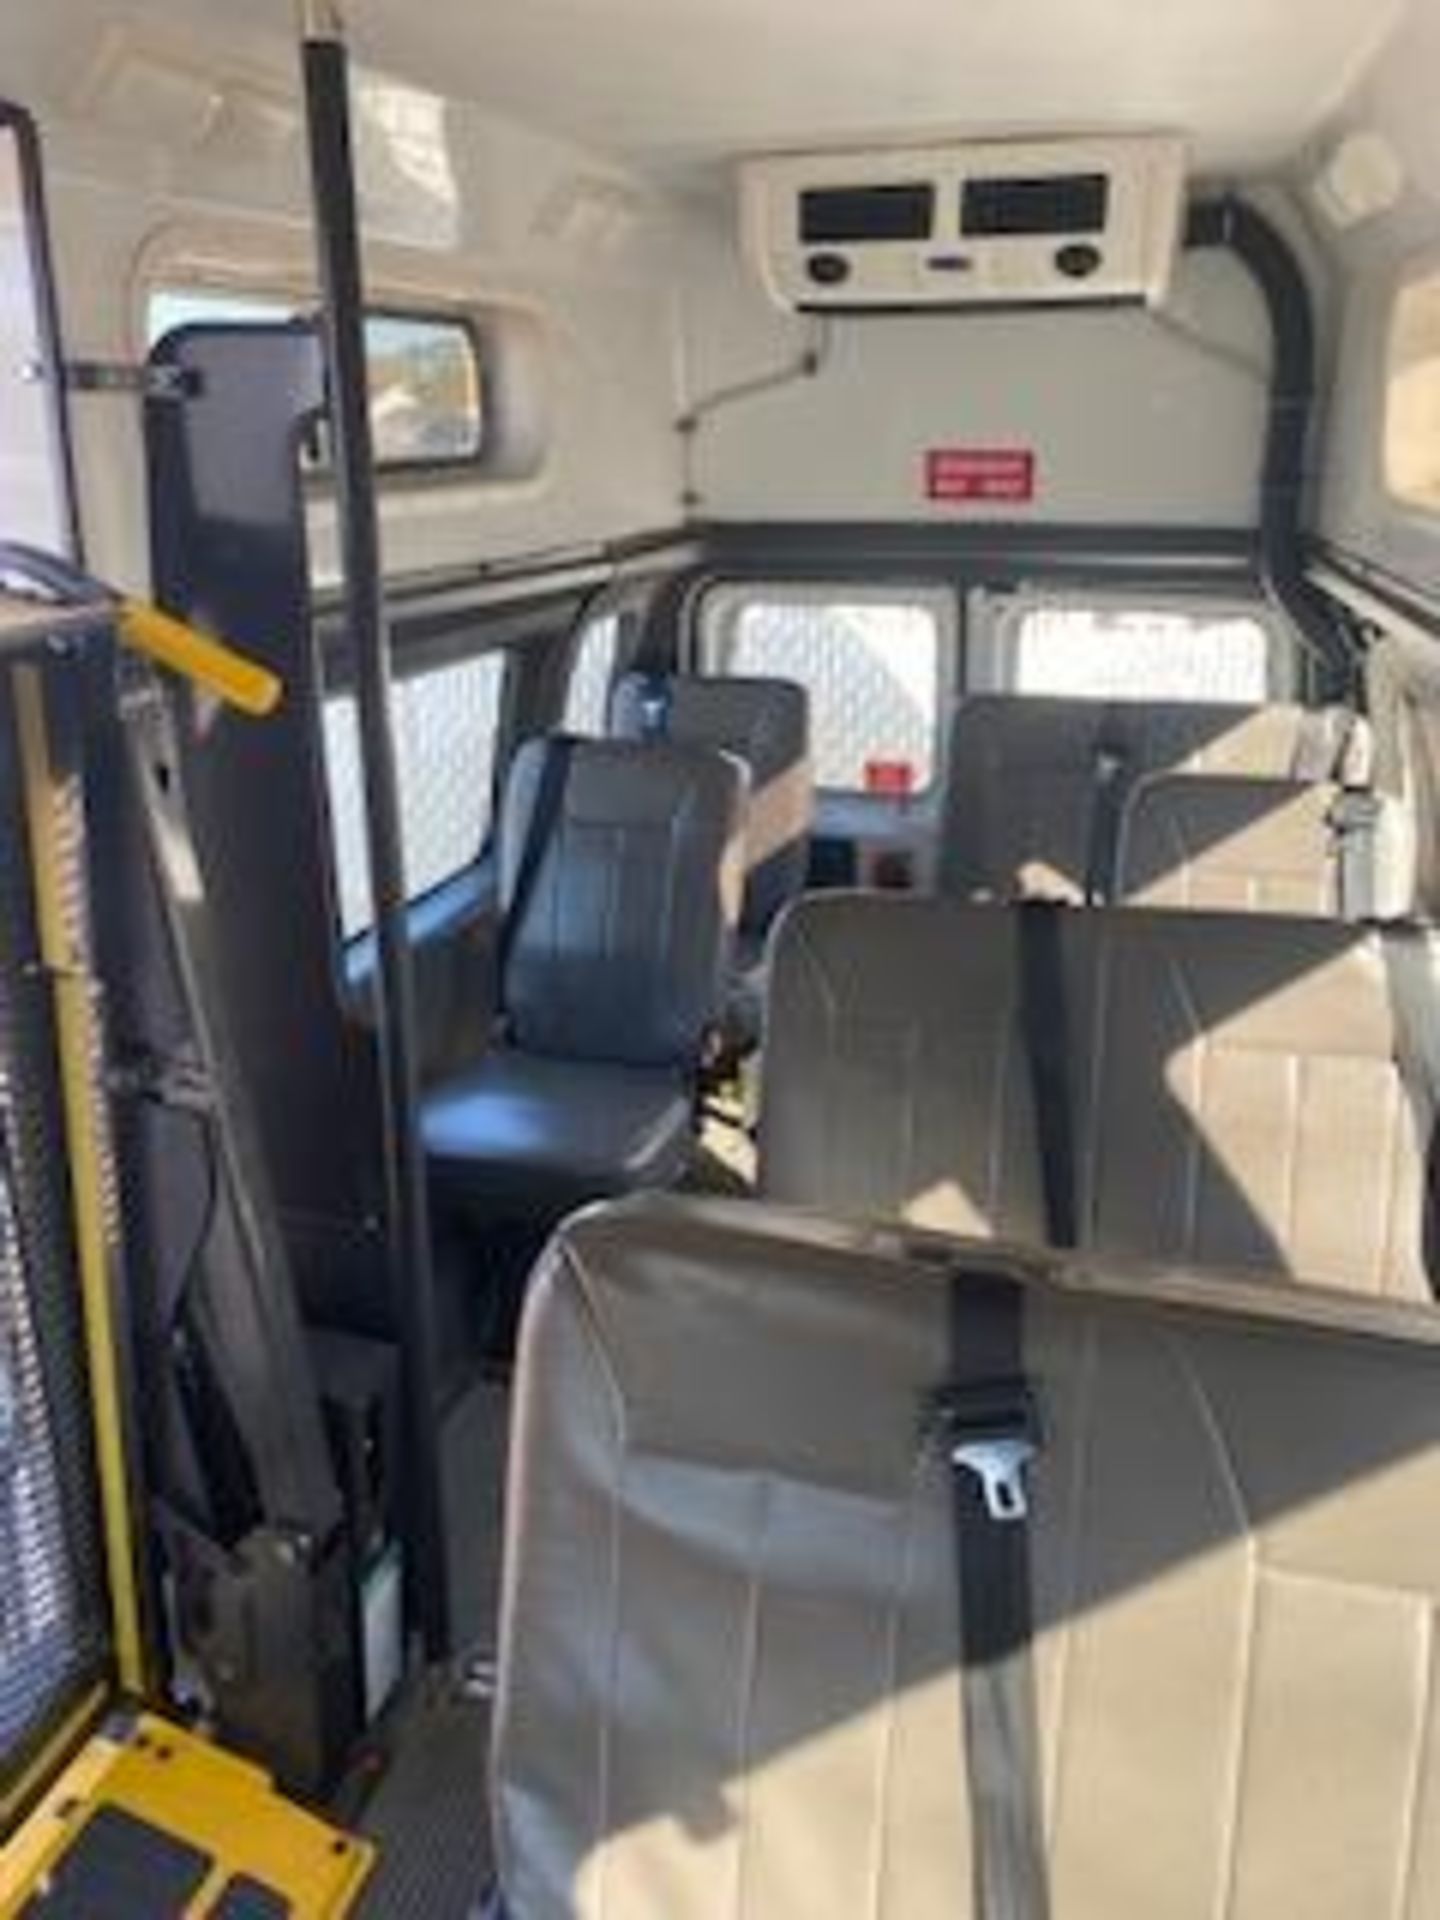 2009 FORD 9 PASSENGER SHUTTLE BUS WITH LIFT - Image 6 of 10